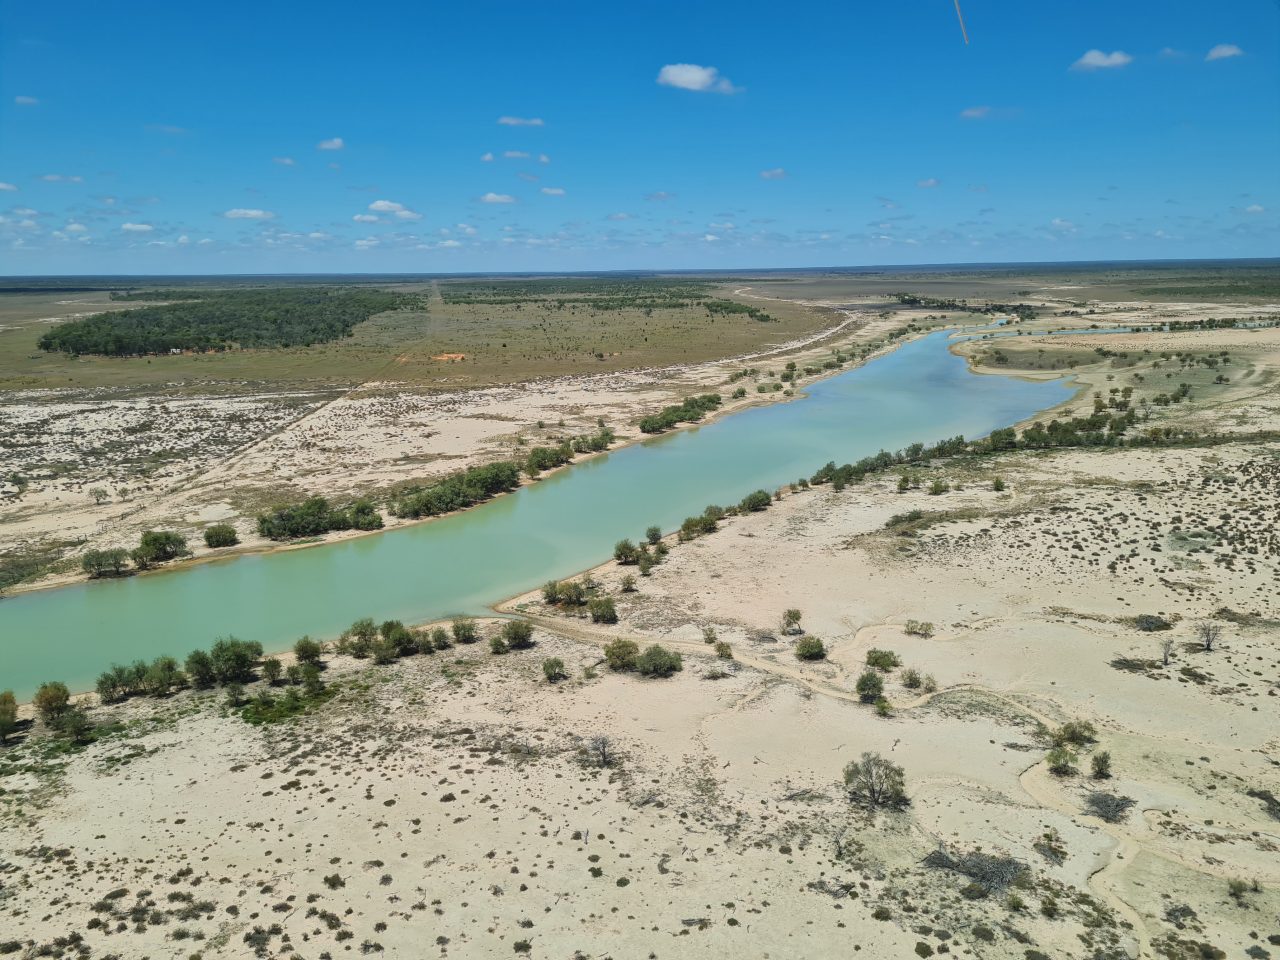 Aerial photo of a lake with light aqua water surrounded by light yellow sand  sporting sparse vegetation that is  more concentrated around the edge of the lake. The landscape is flat.